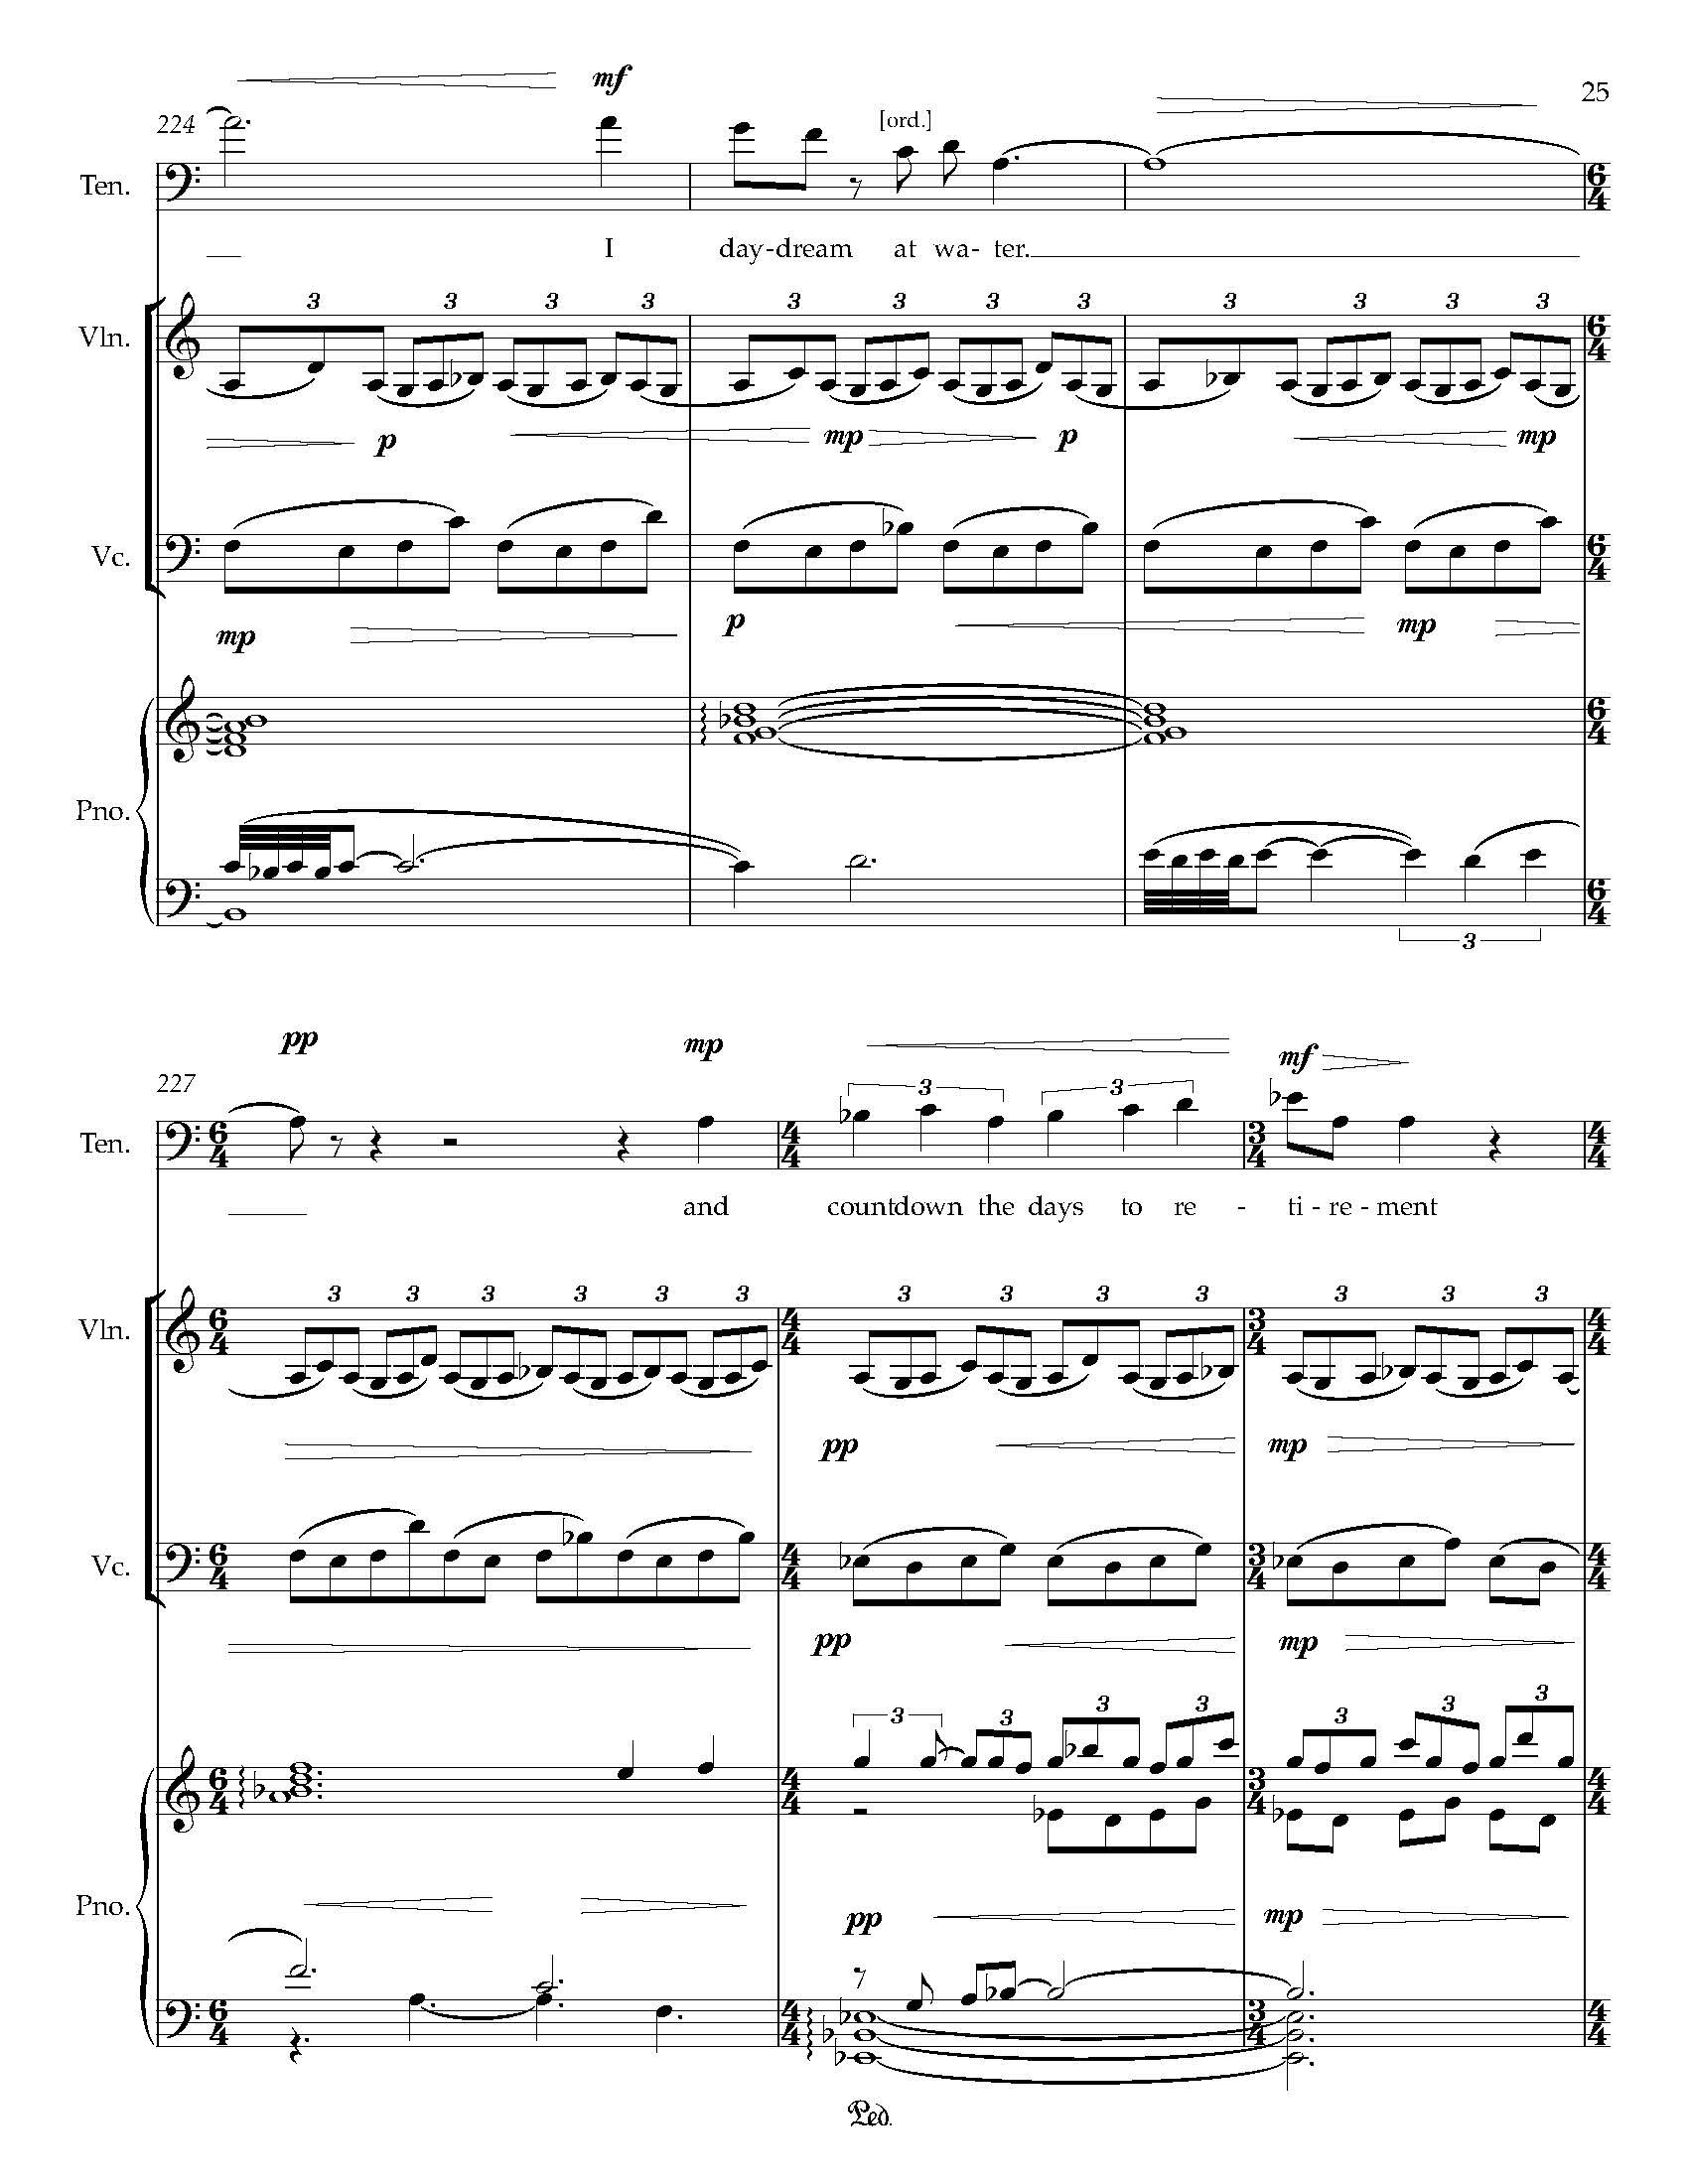 Gursky Songs - Complete Score_Page_33.jpg